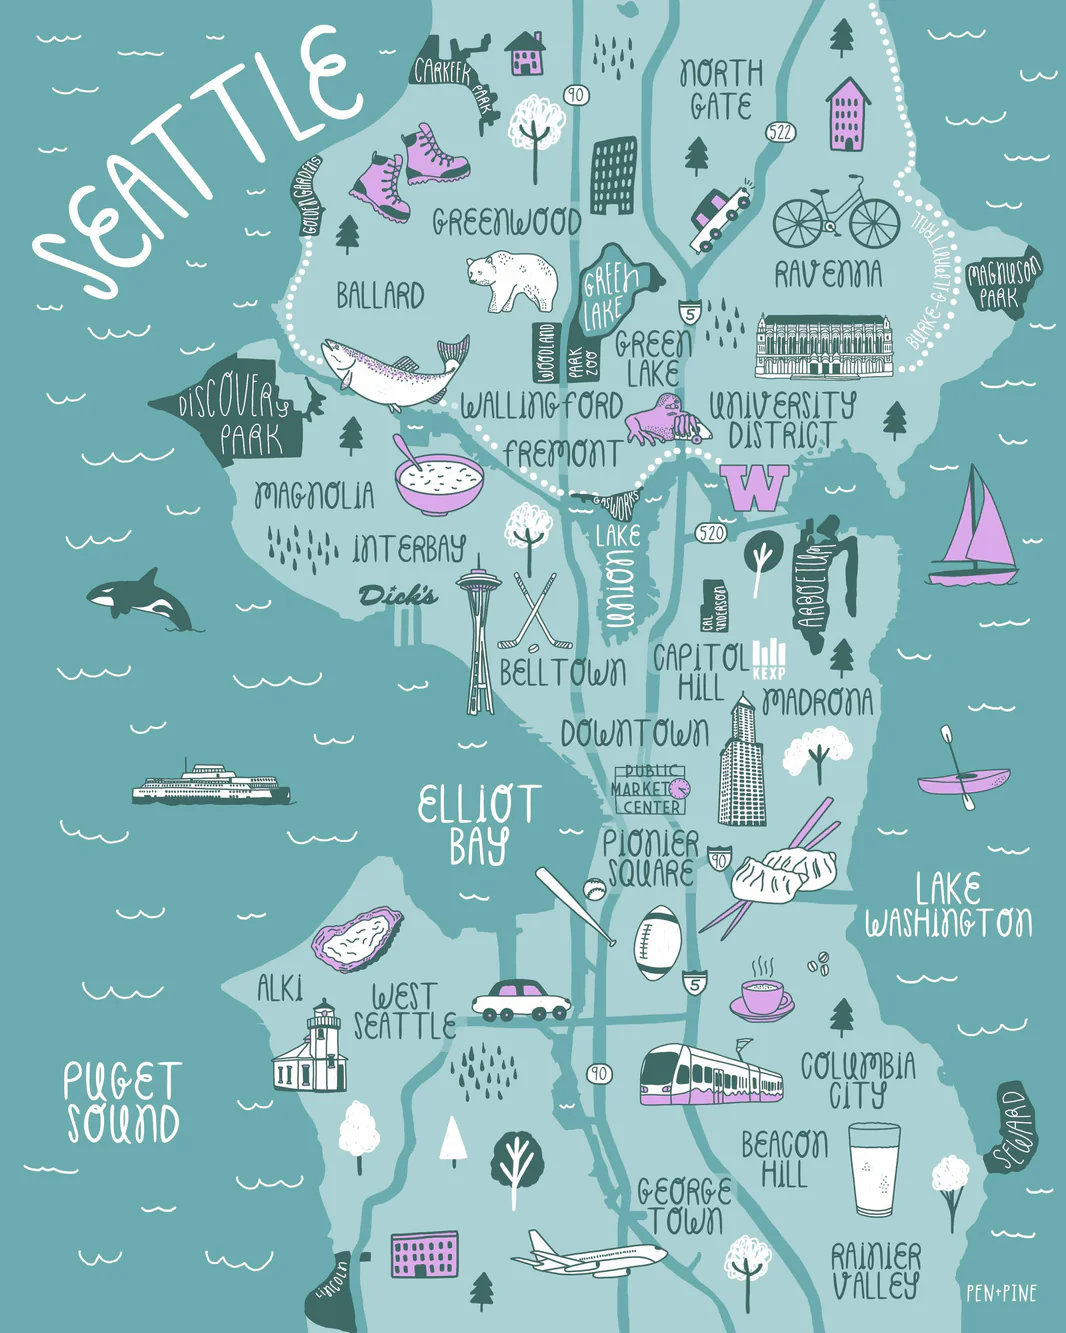 Illustration of Seattle with comical regional stereotypes